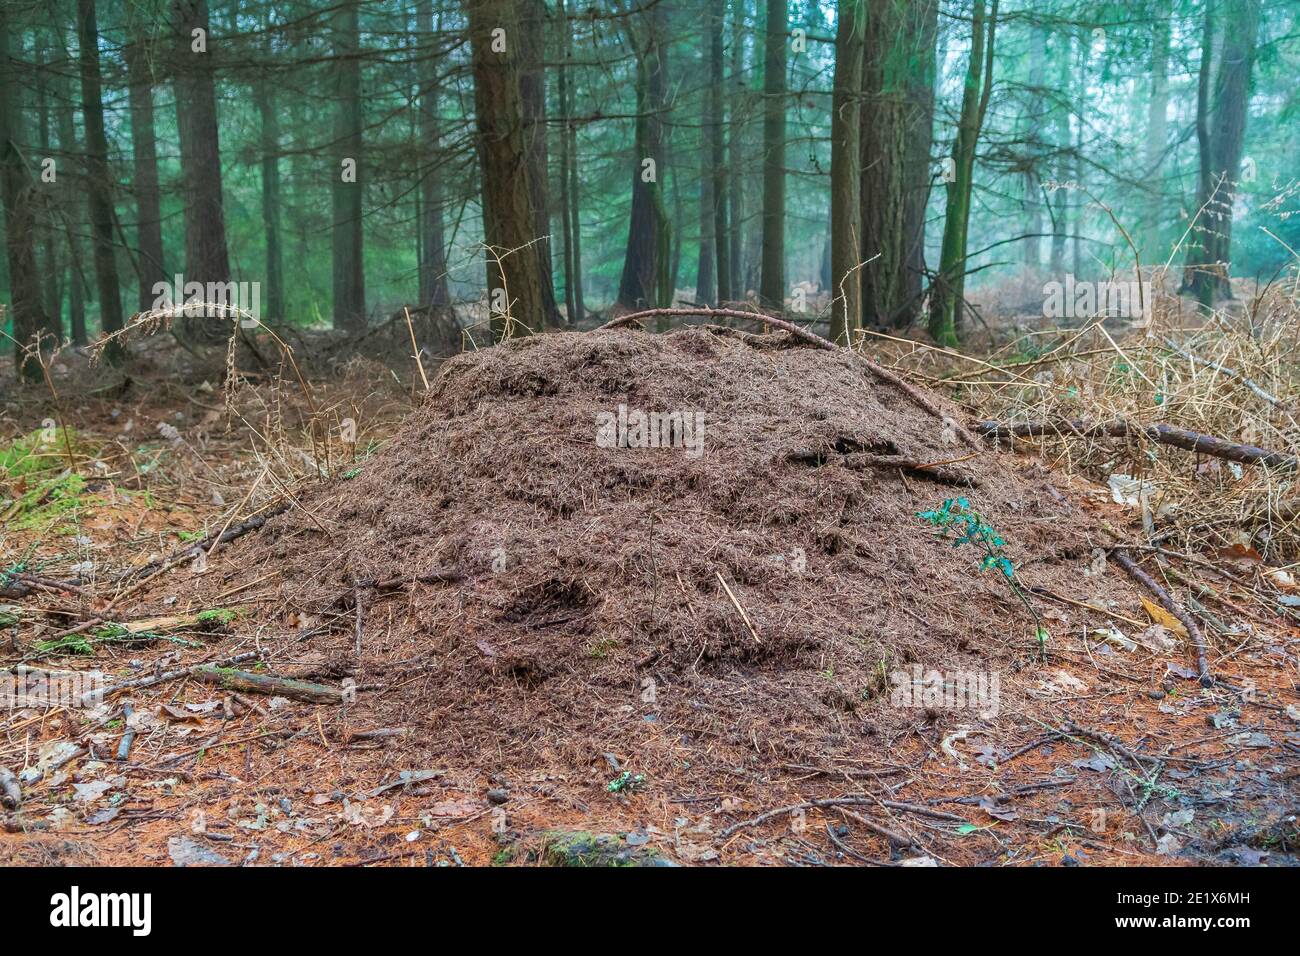 Wood ant nest in a forest Stock Photo